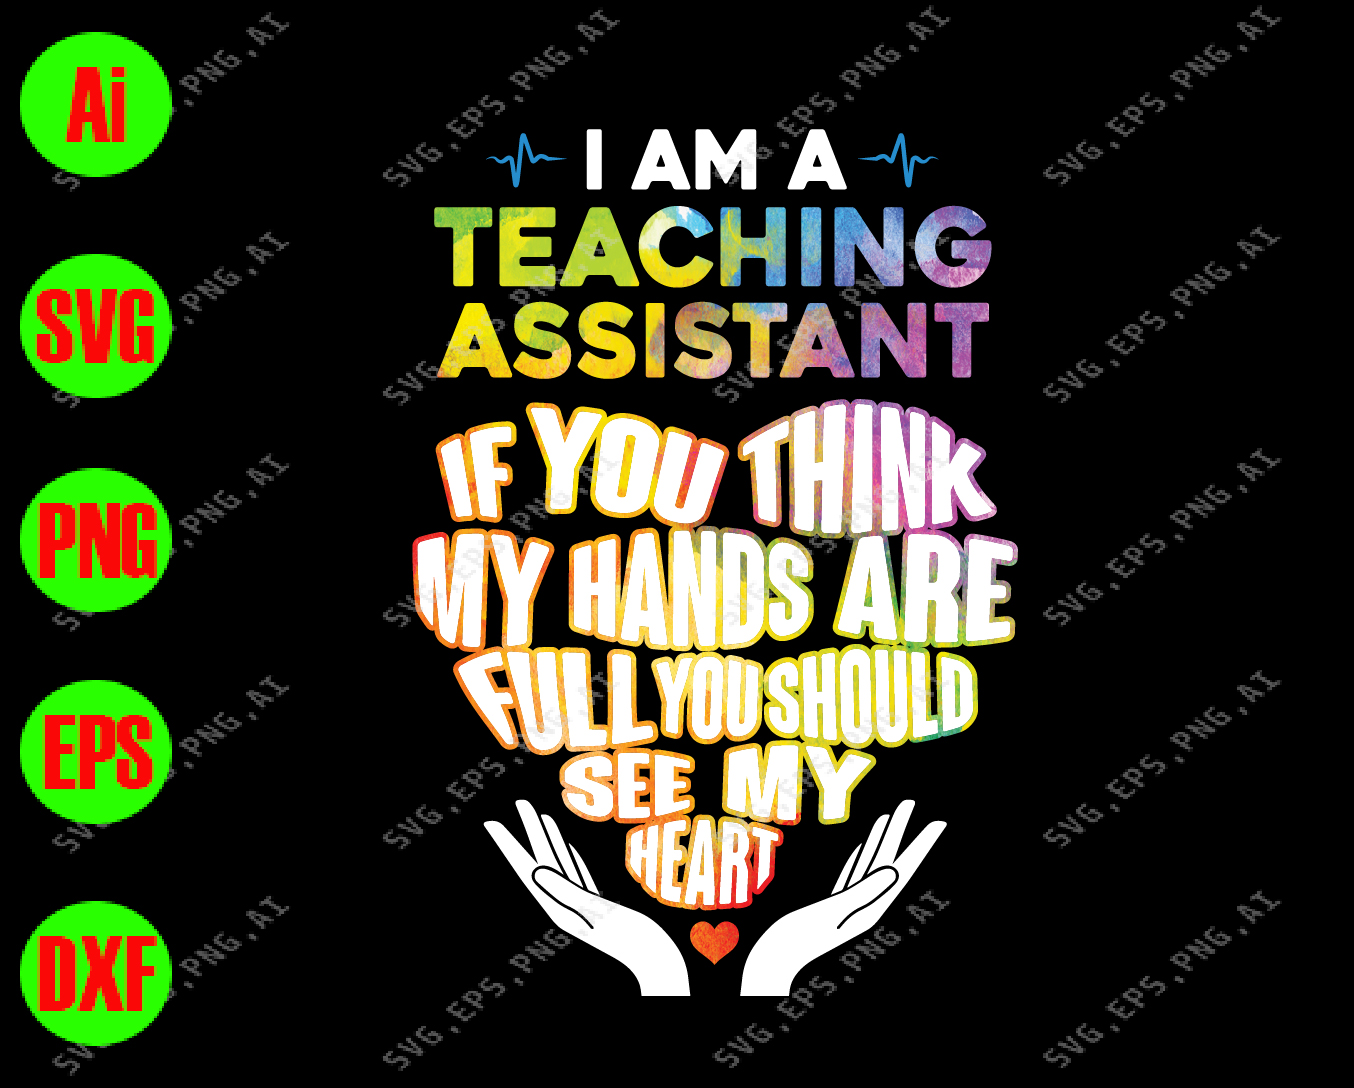 Download I Am A Teaching Assistant If You Think My Hands Are Full You Should See My Heart Svg Dxf Eps Png Digital Download Designbtf Com